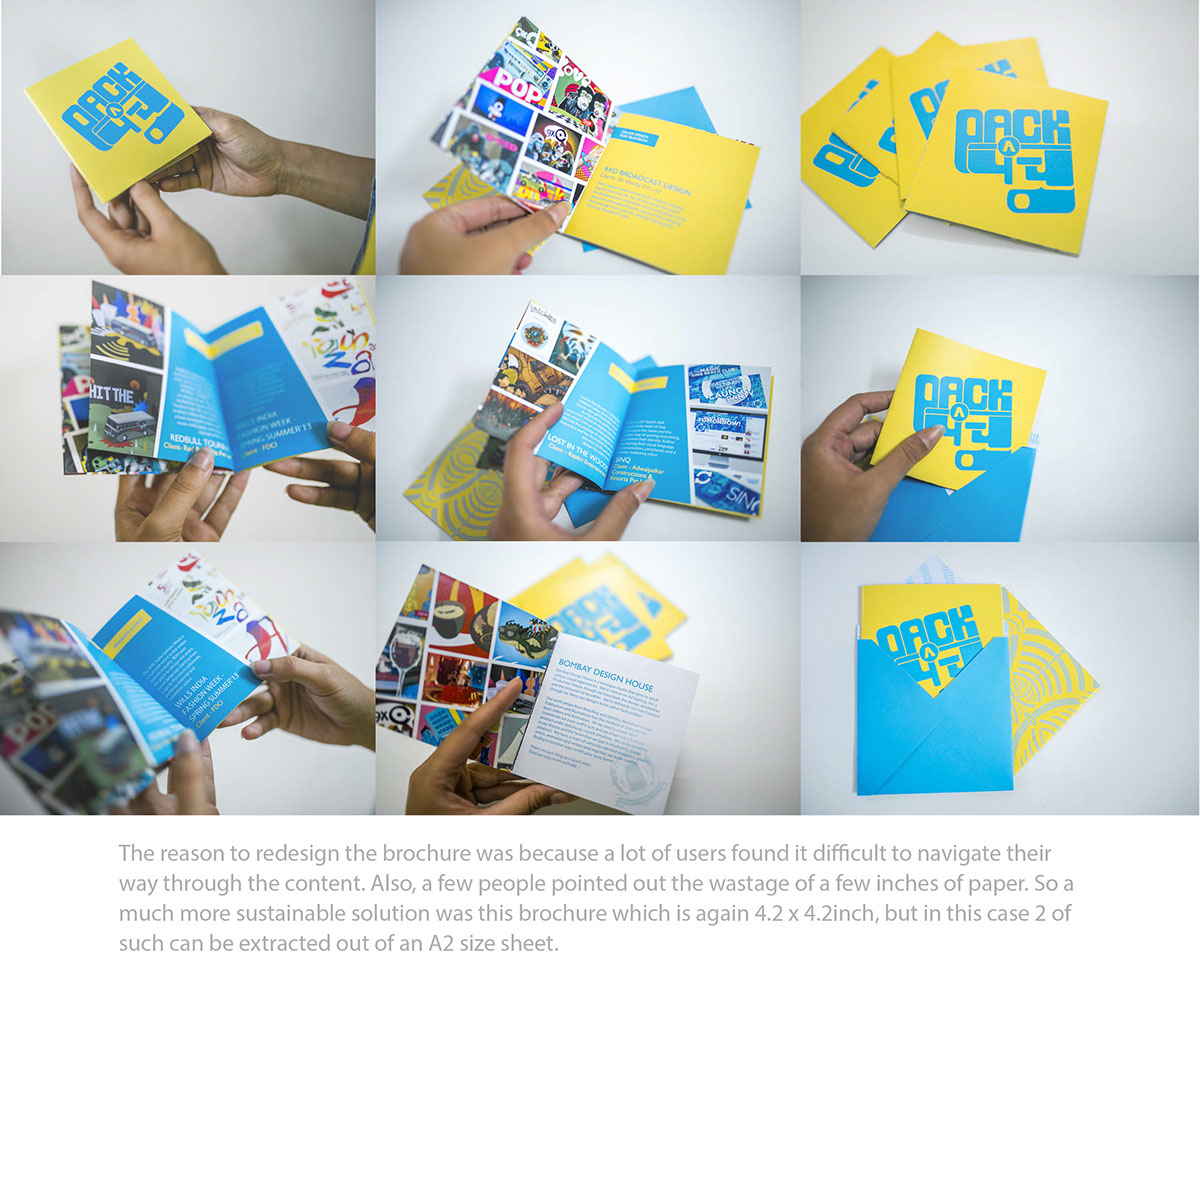 Pack-A-Panch Pack-A-Punch Exhibition  Bombay design house Elements of five five fifth anniversary design exhibition brochure Creative Brochure invitation cards Pop-Up Cards Branding collaterals yellow and blue experimental